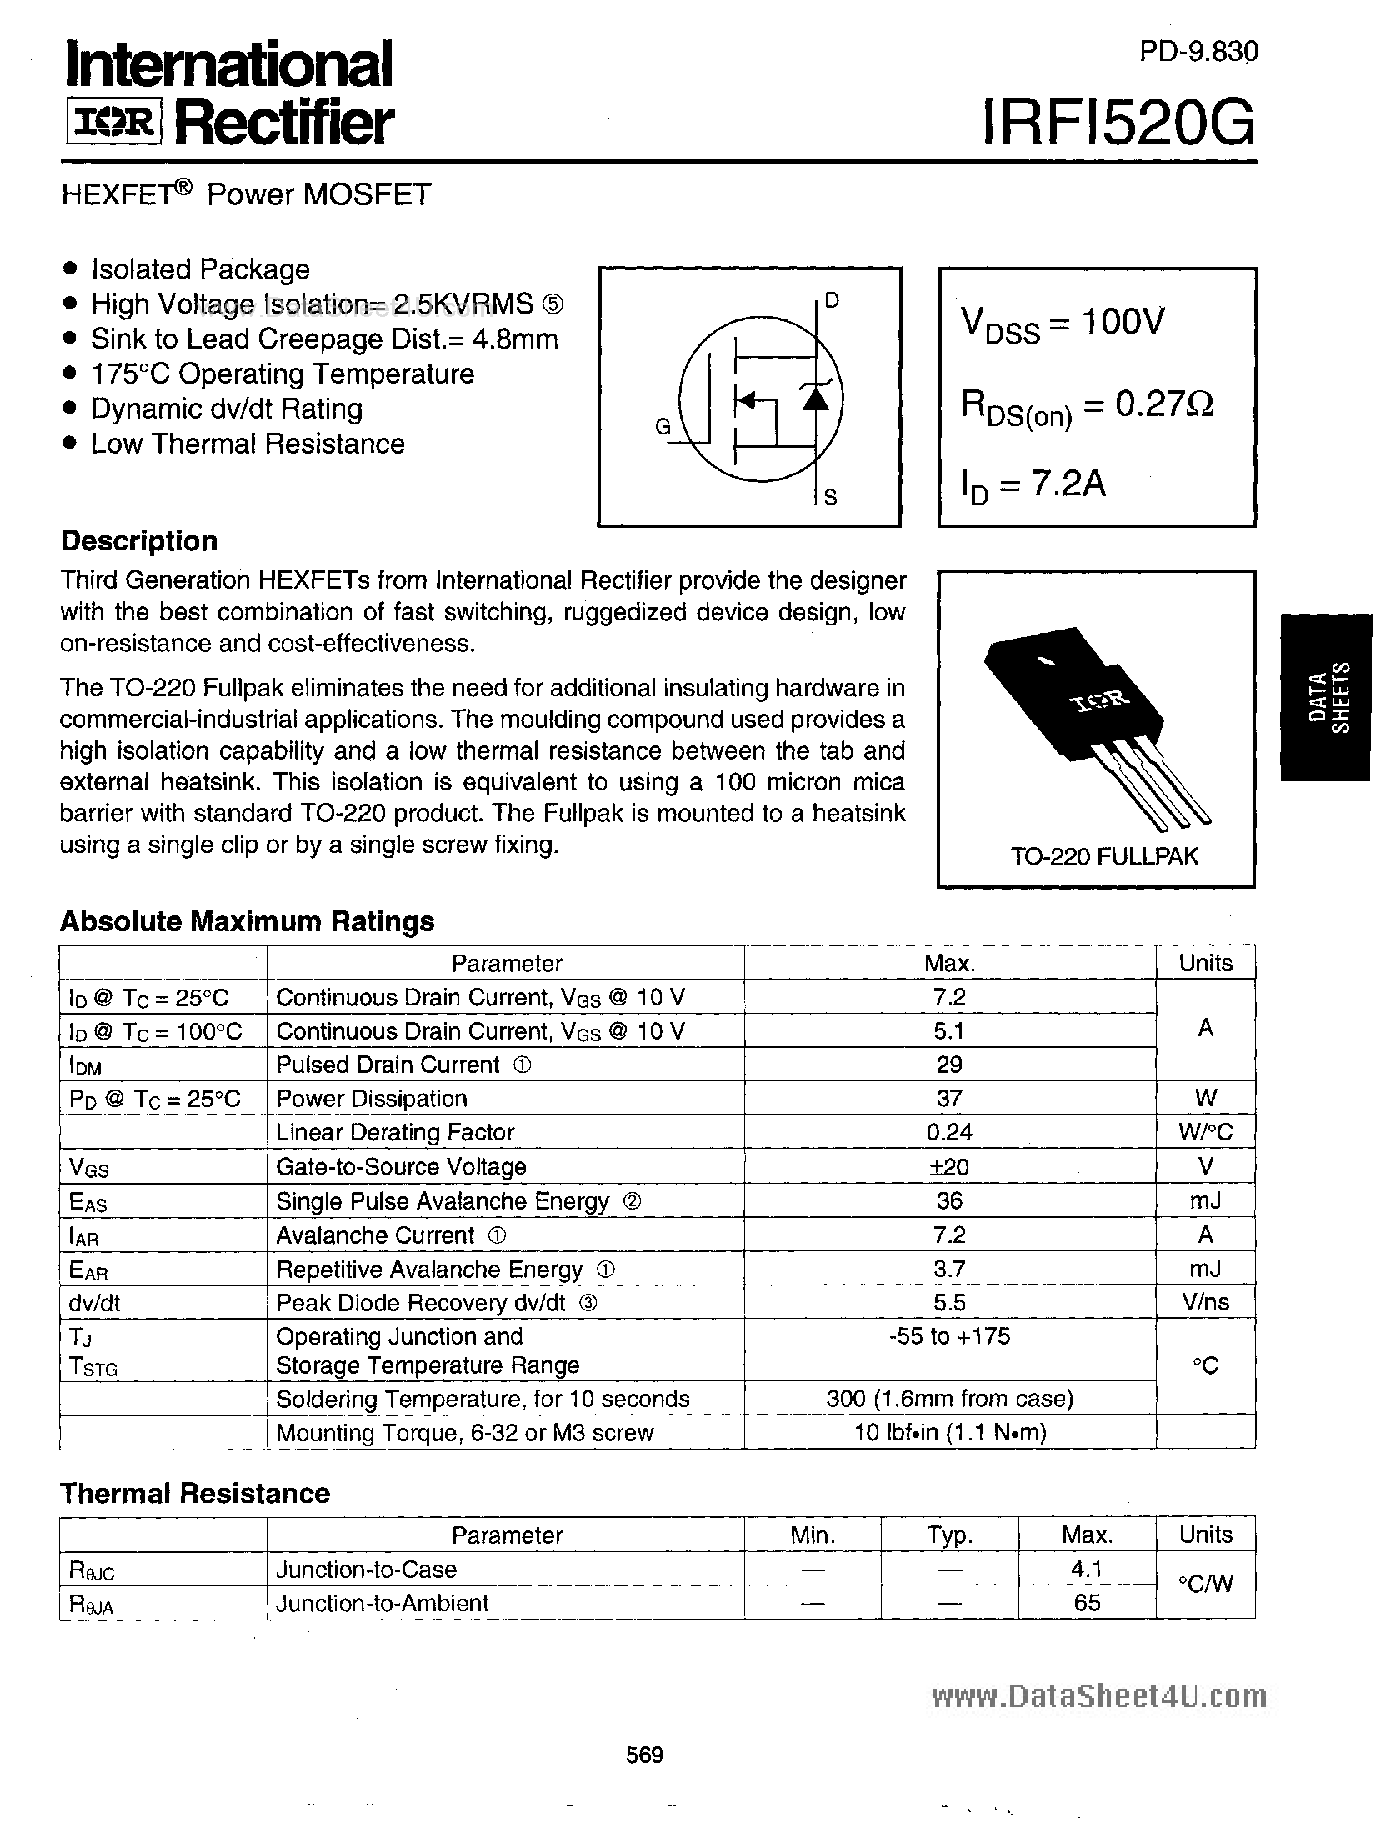 Datasheet IRF1520G - Power MOSFET page 1